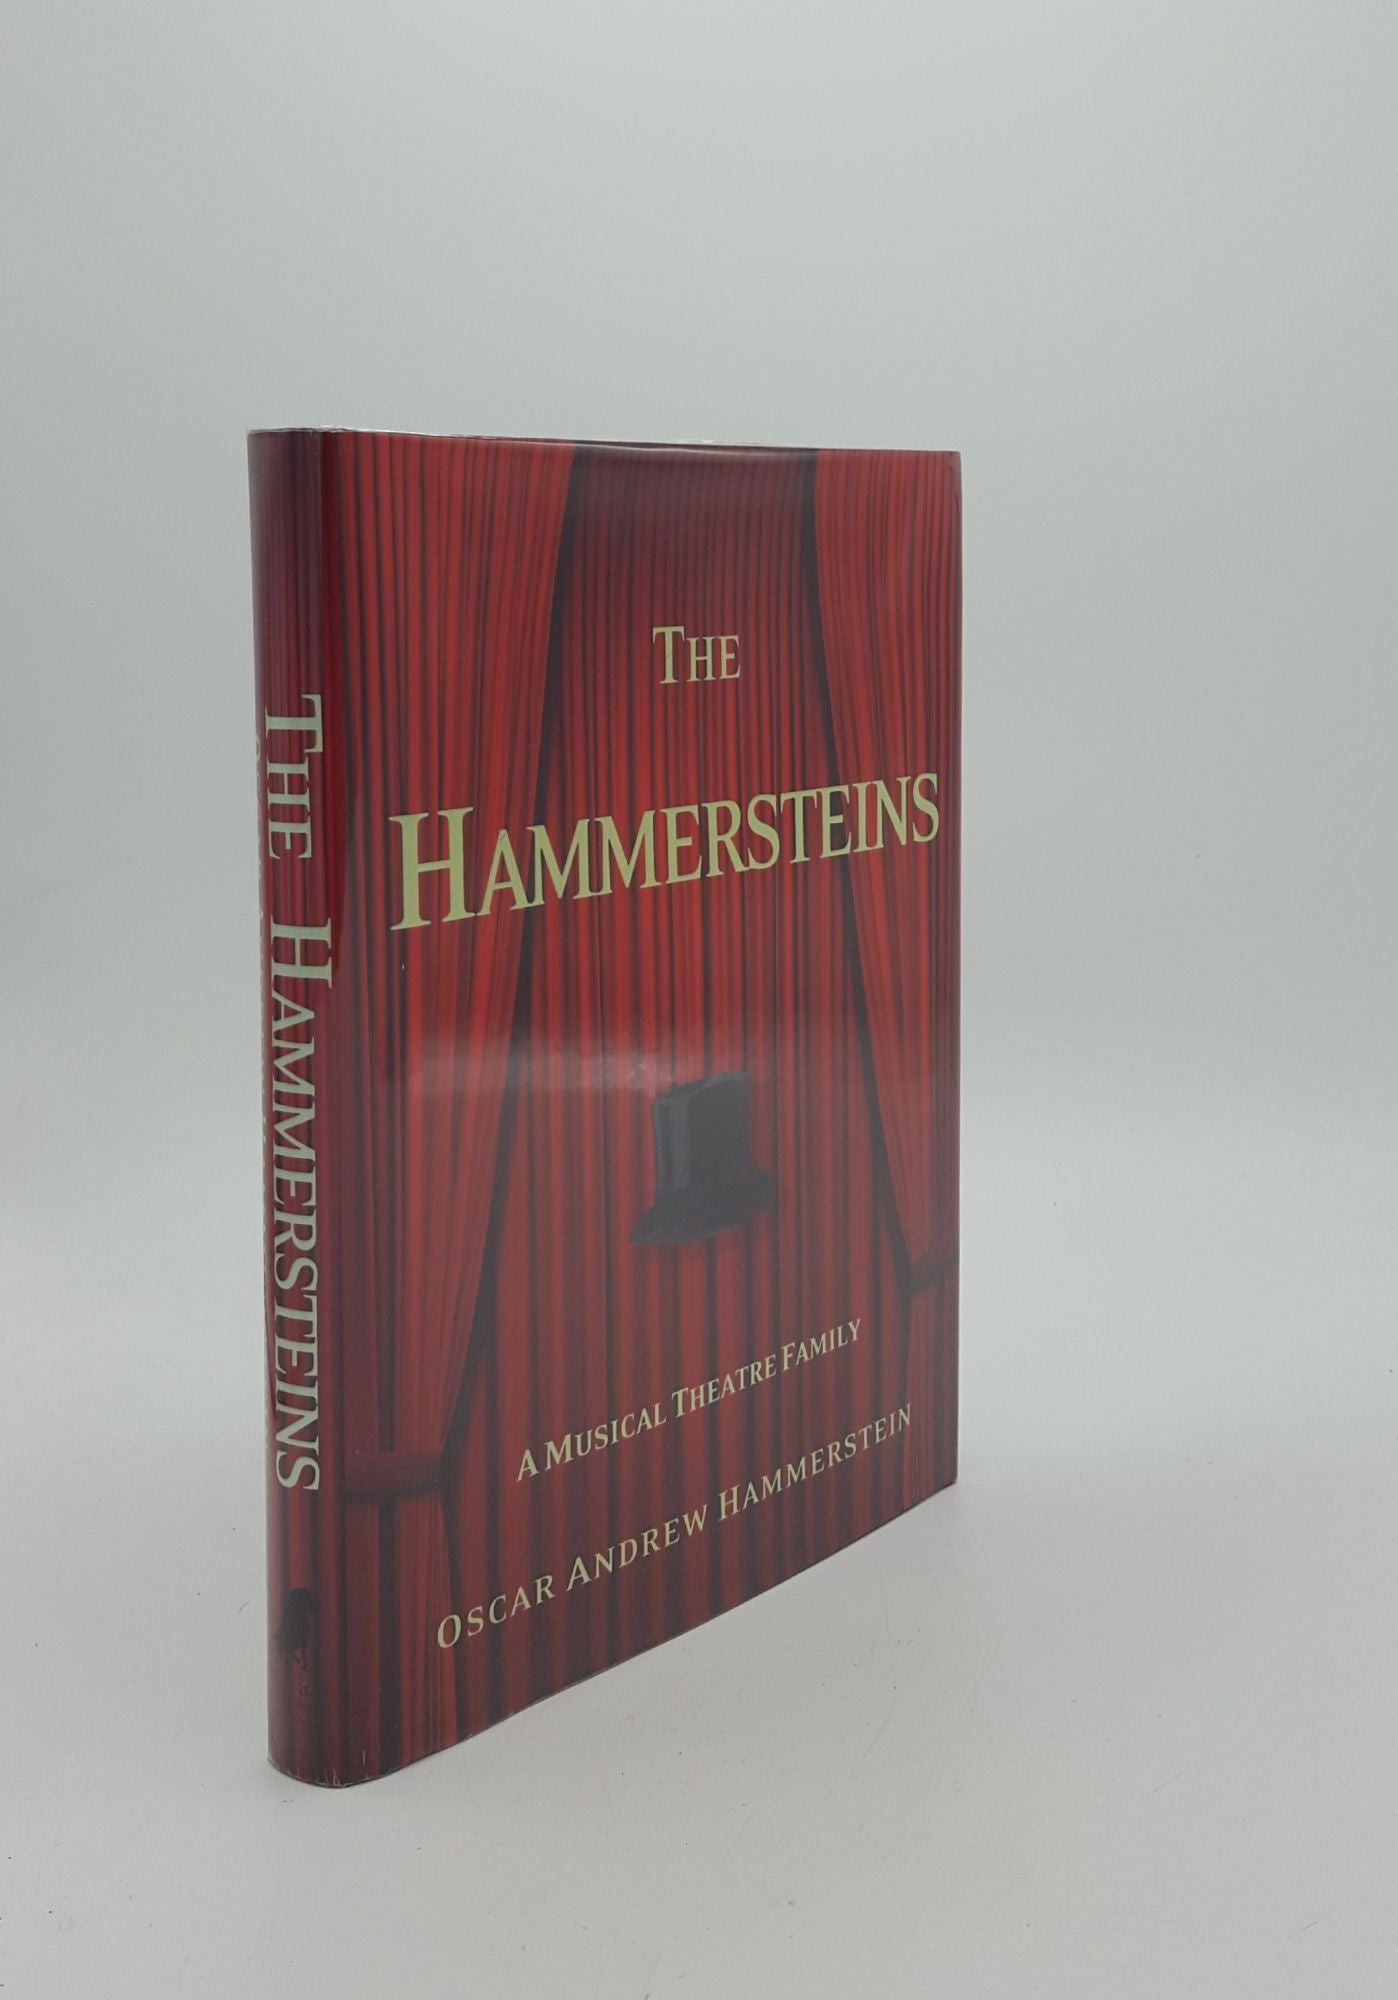 HAMMERSTEIN Oscar Andrew - The Hammersteins a Musical Theatre Family